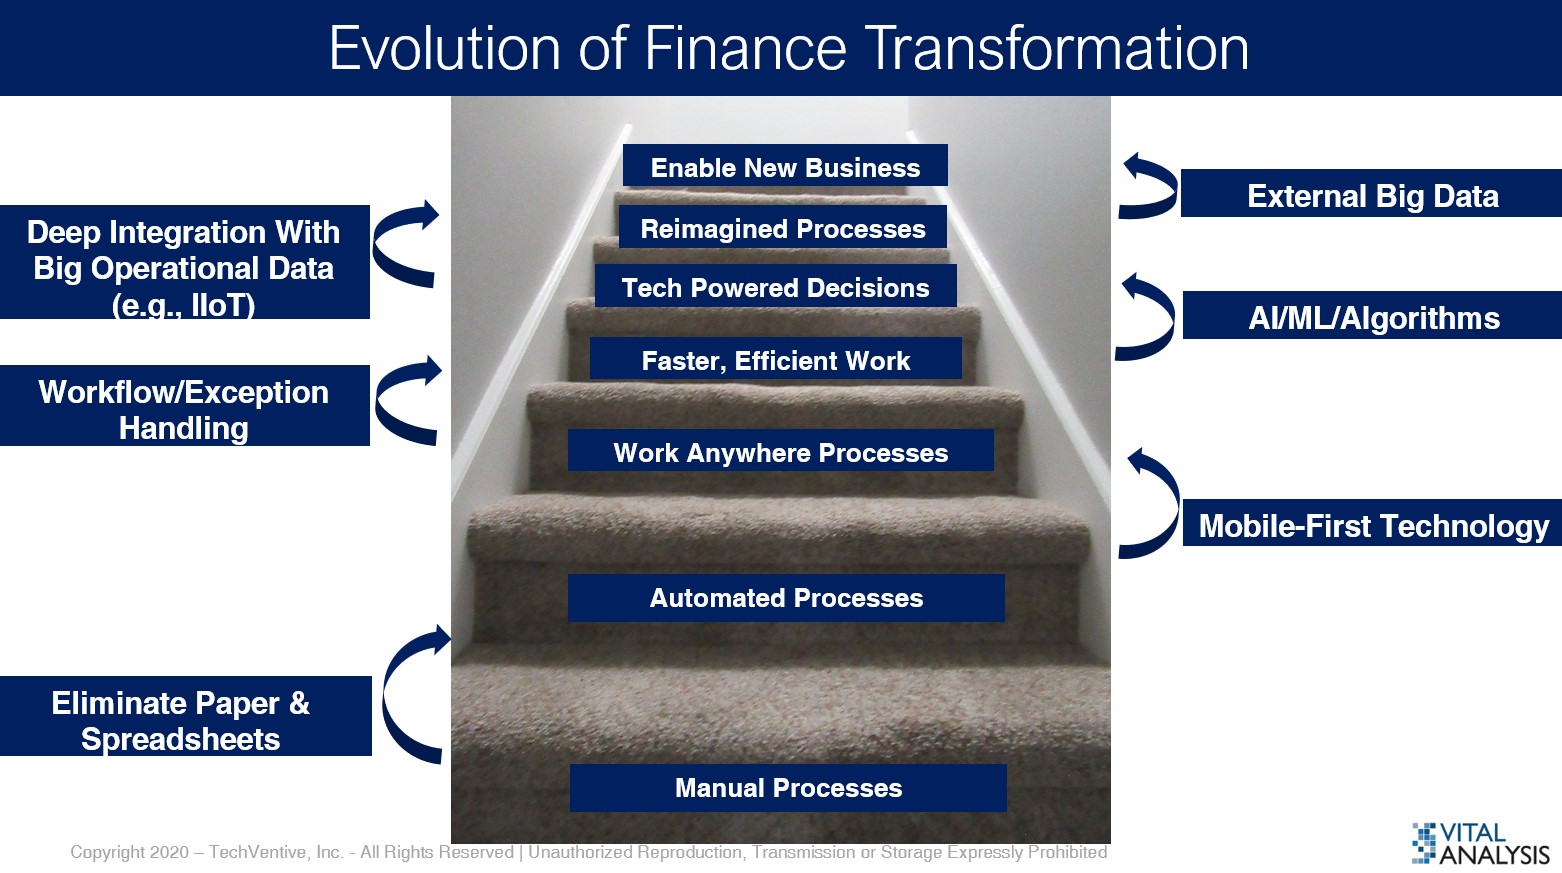 This Points Shows Evolution of finance transformation 